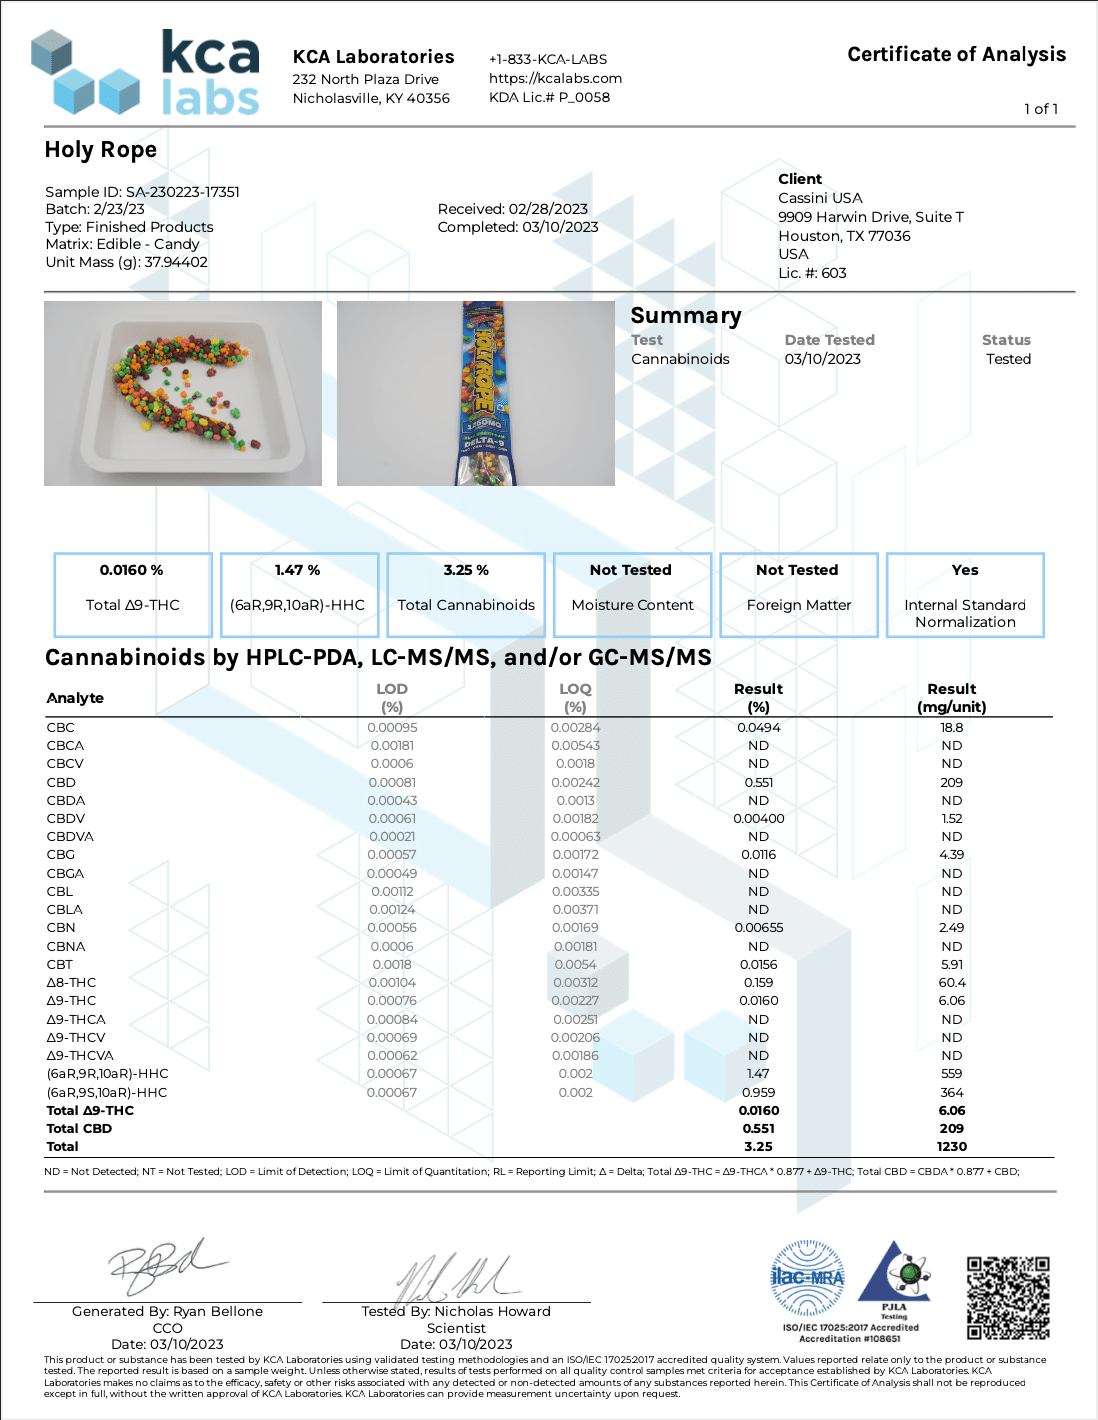 Third party lab test results for delta 9 thc nerd rope edible gummy conducted in 2023 by an fda-approved laboratory for cannabinoid testing and certification.